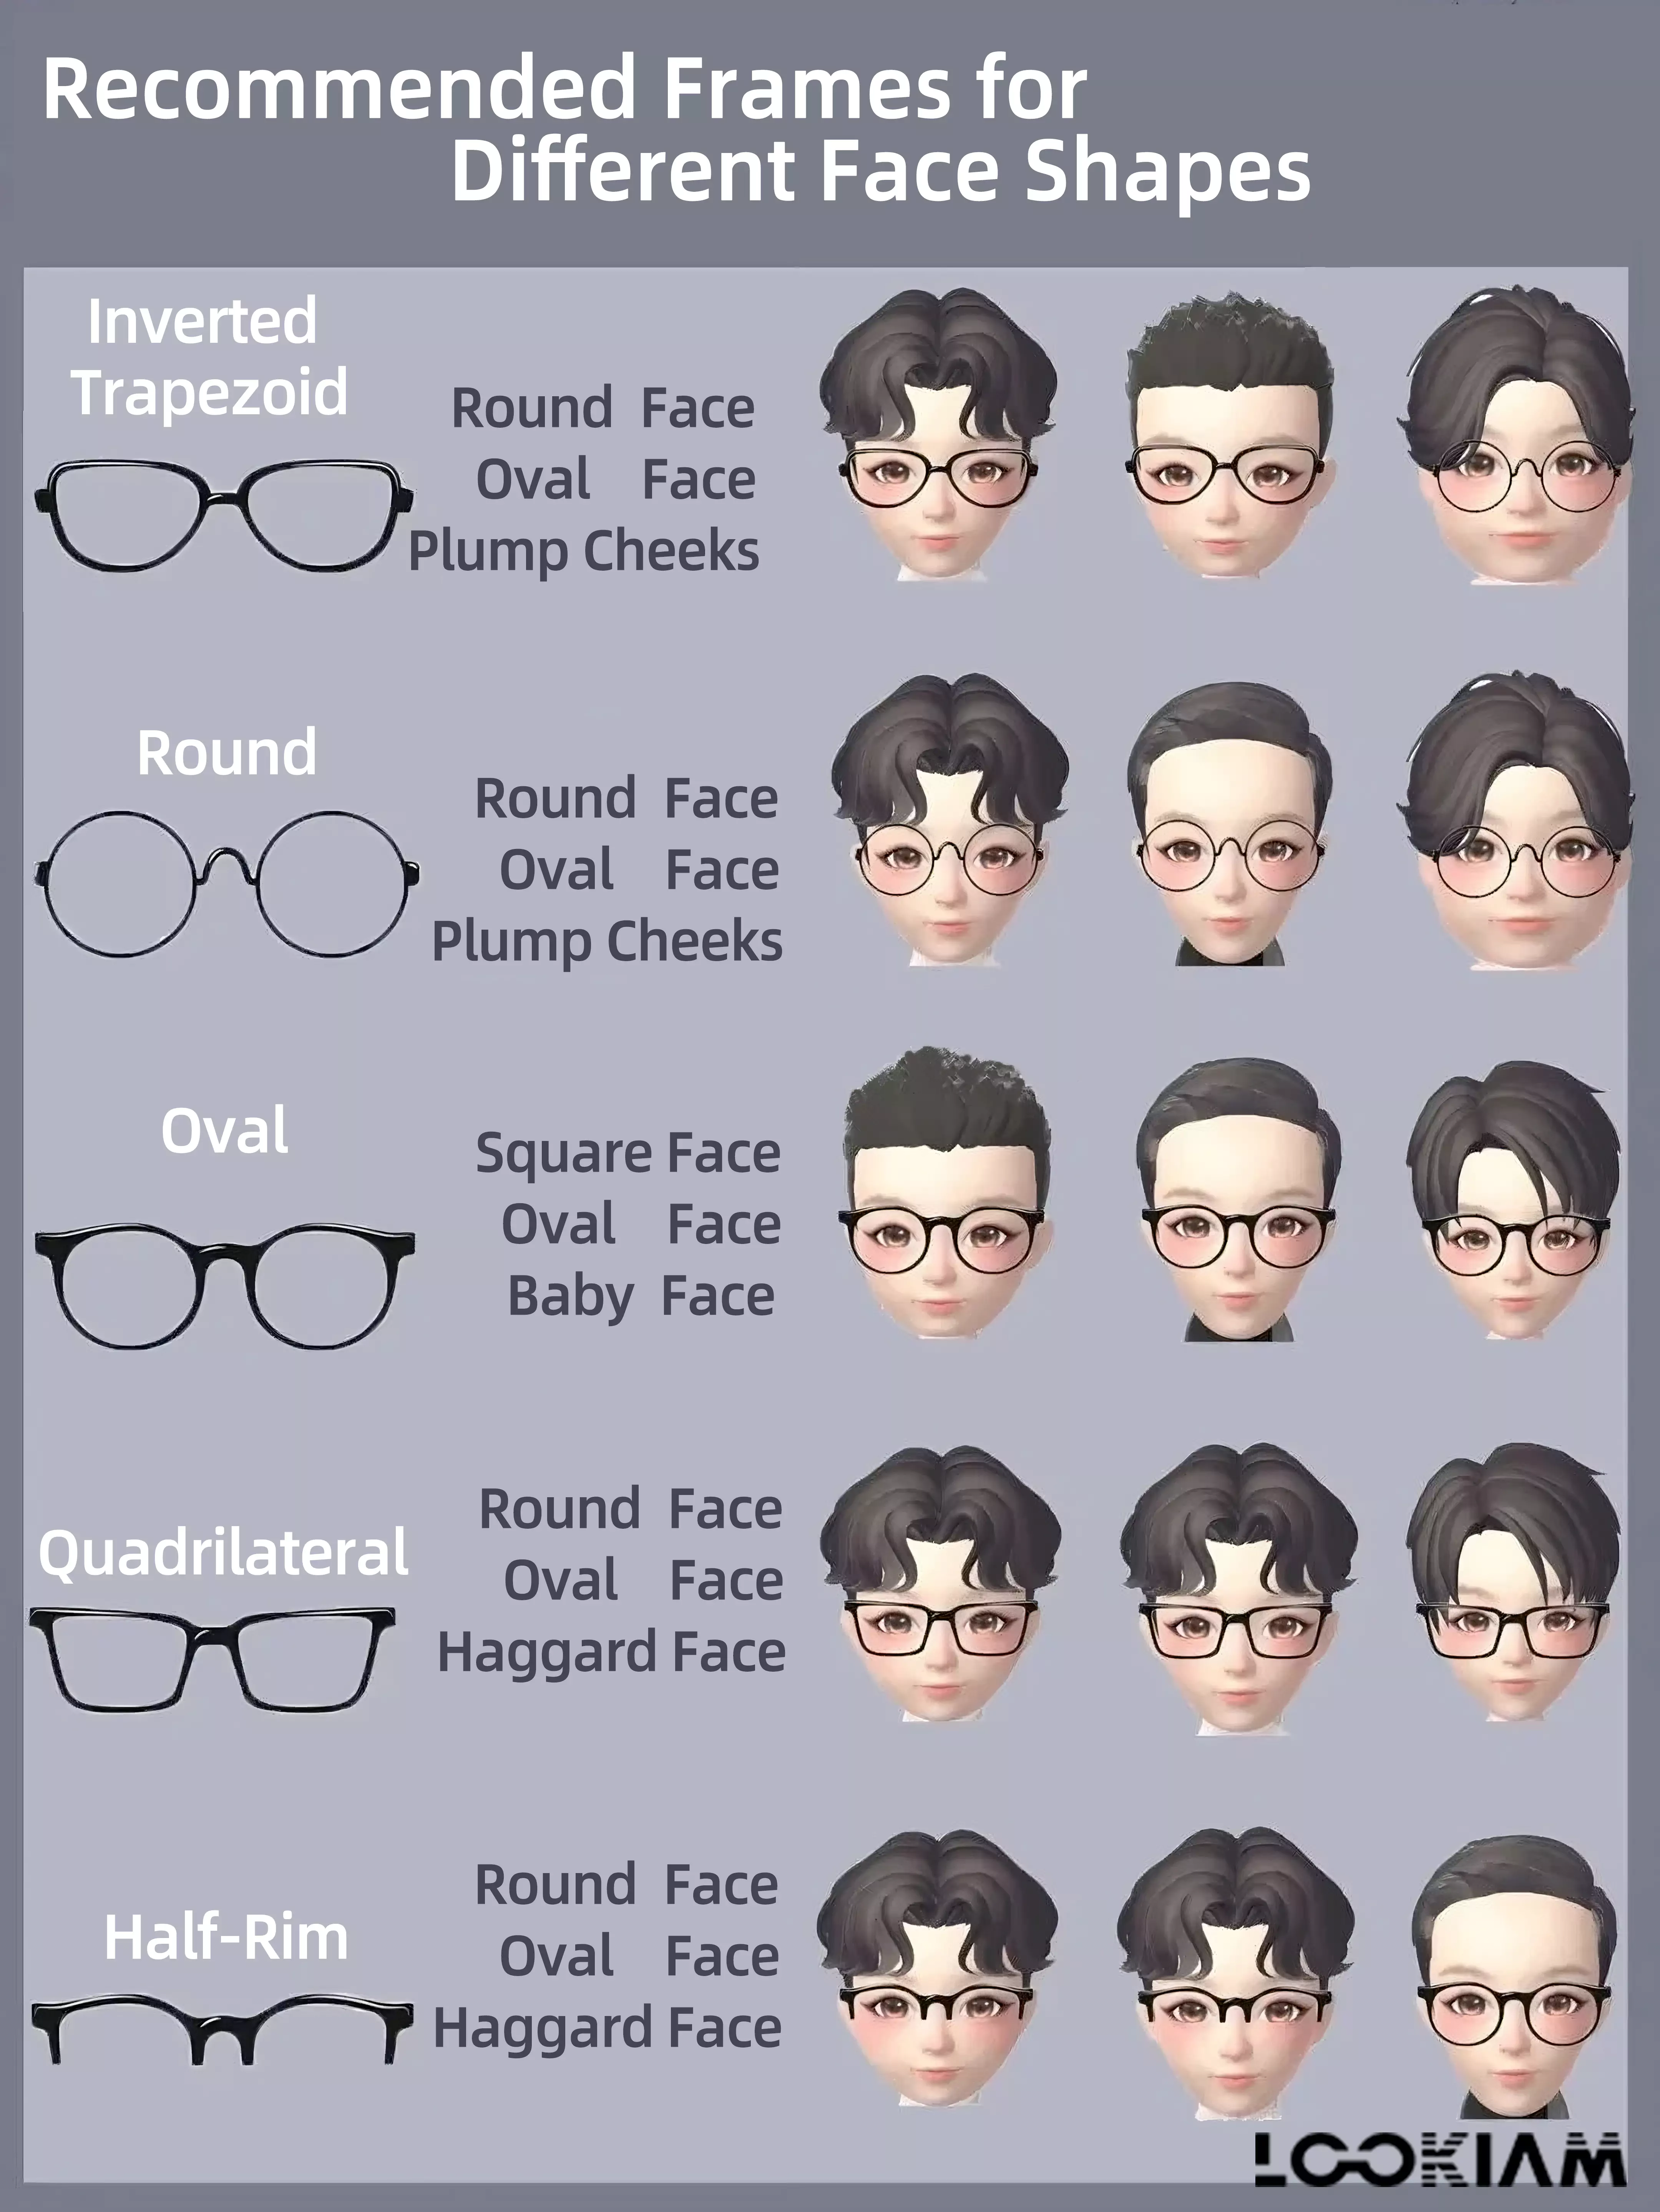 How to choose glasses for different face shapes